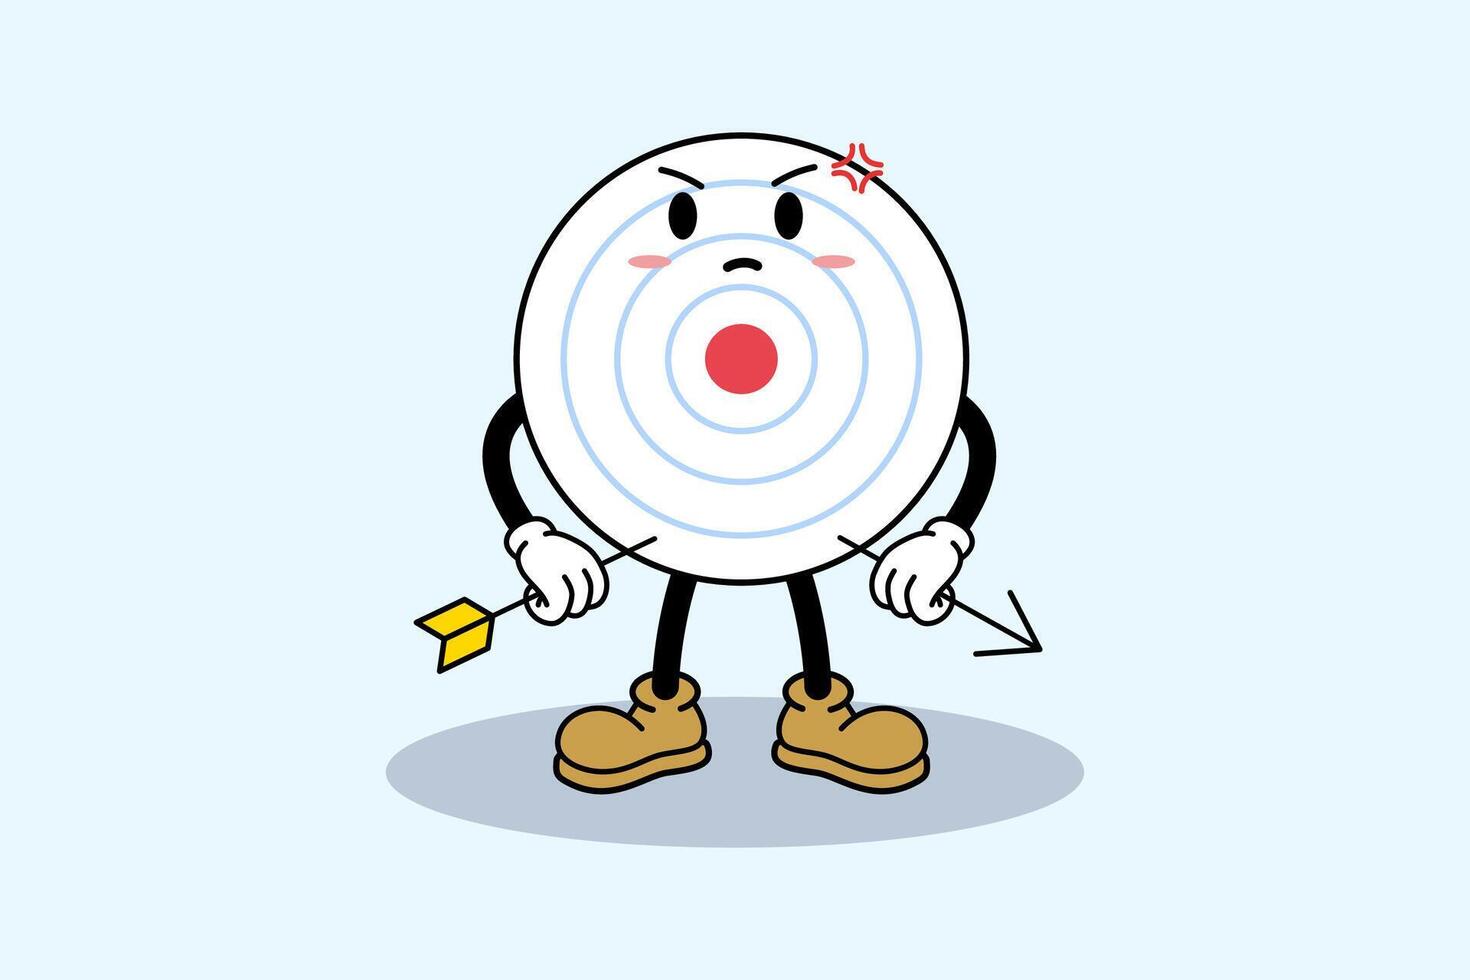 dartboard character with annoyed angry no target for finance marketing business company vector